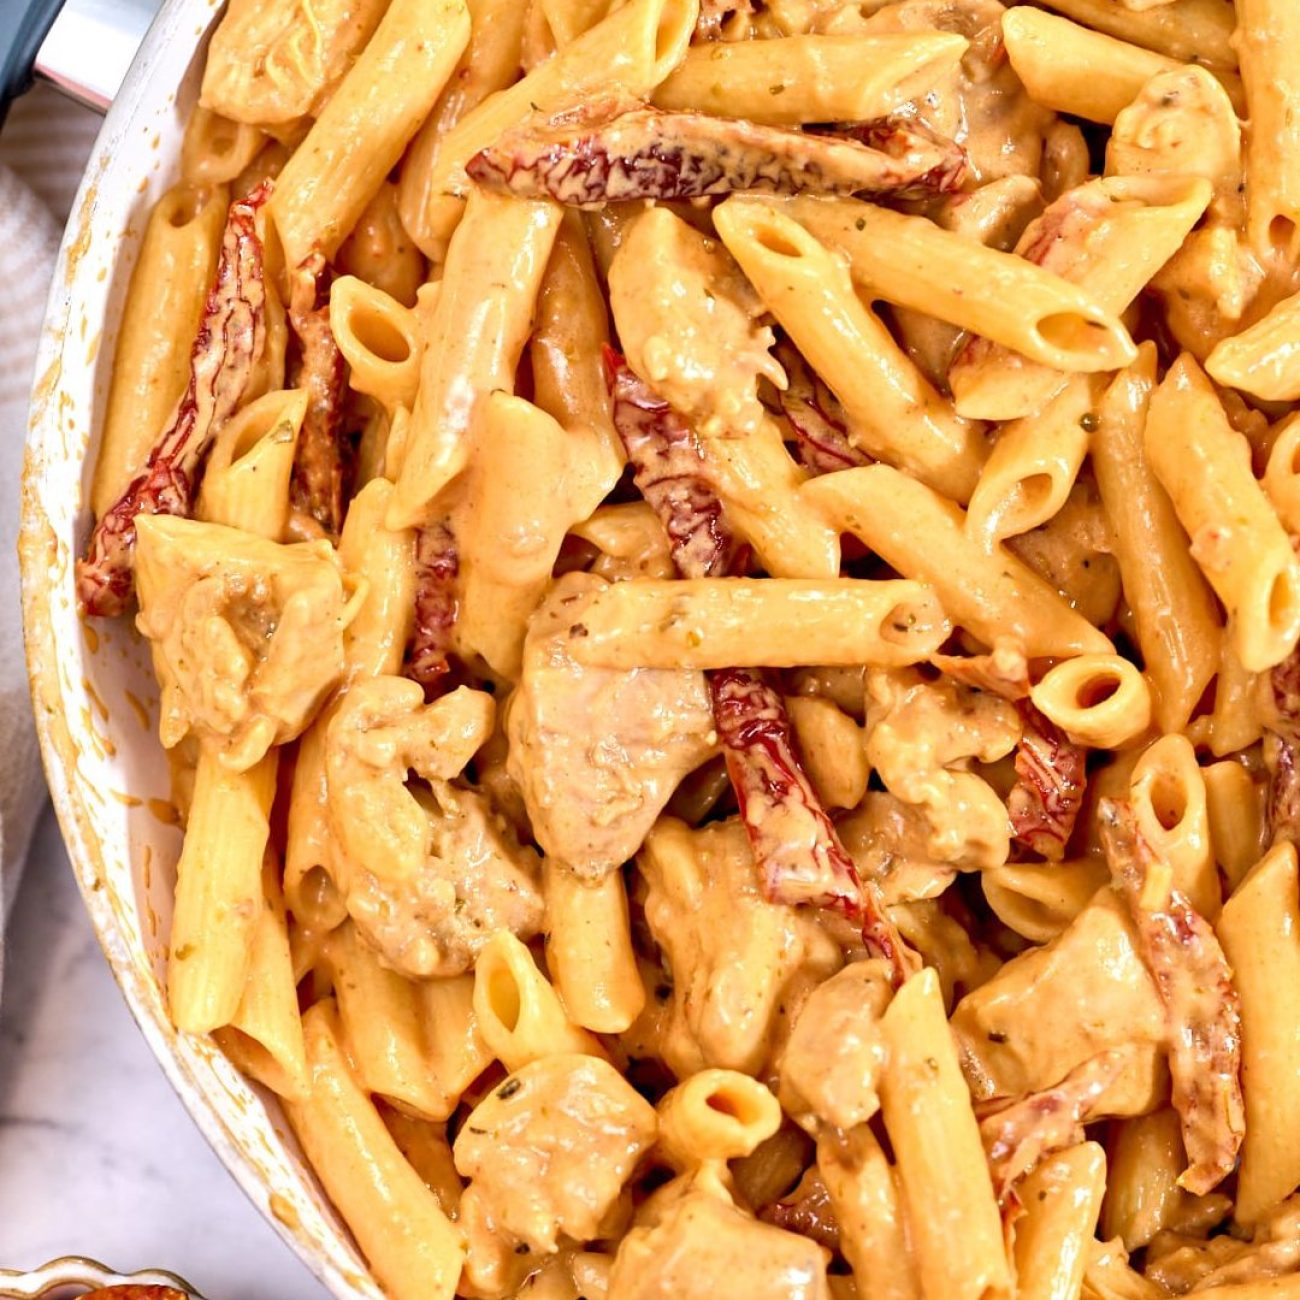 Irresistible Vodka Cream Pasta to Enchant Your Date